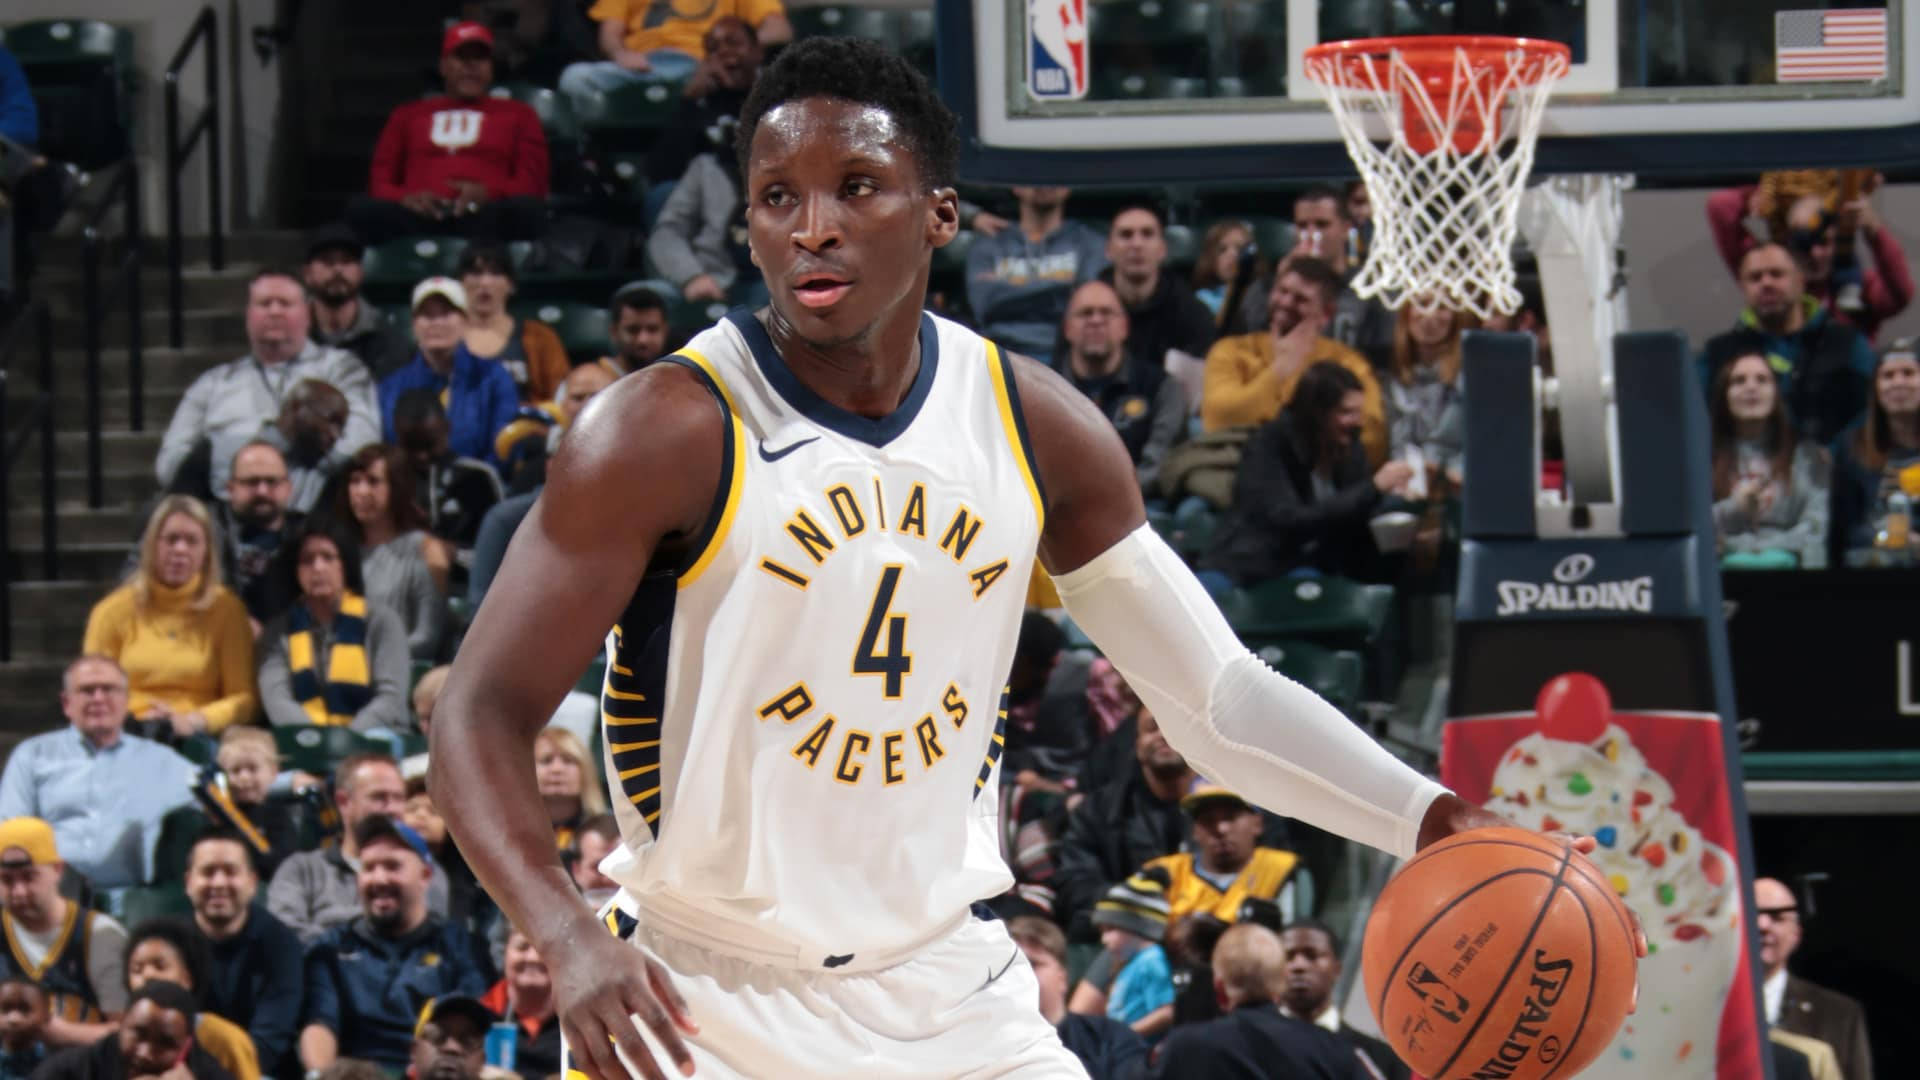 Victor Oladipo On A Crowded Court Wallpaper